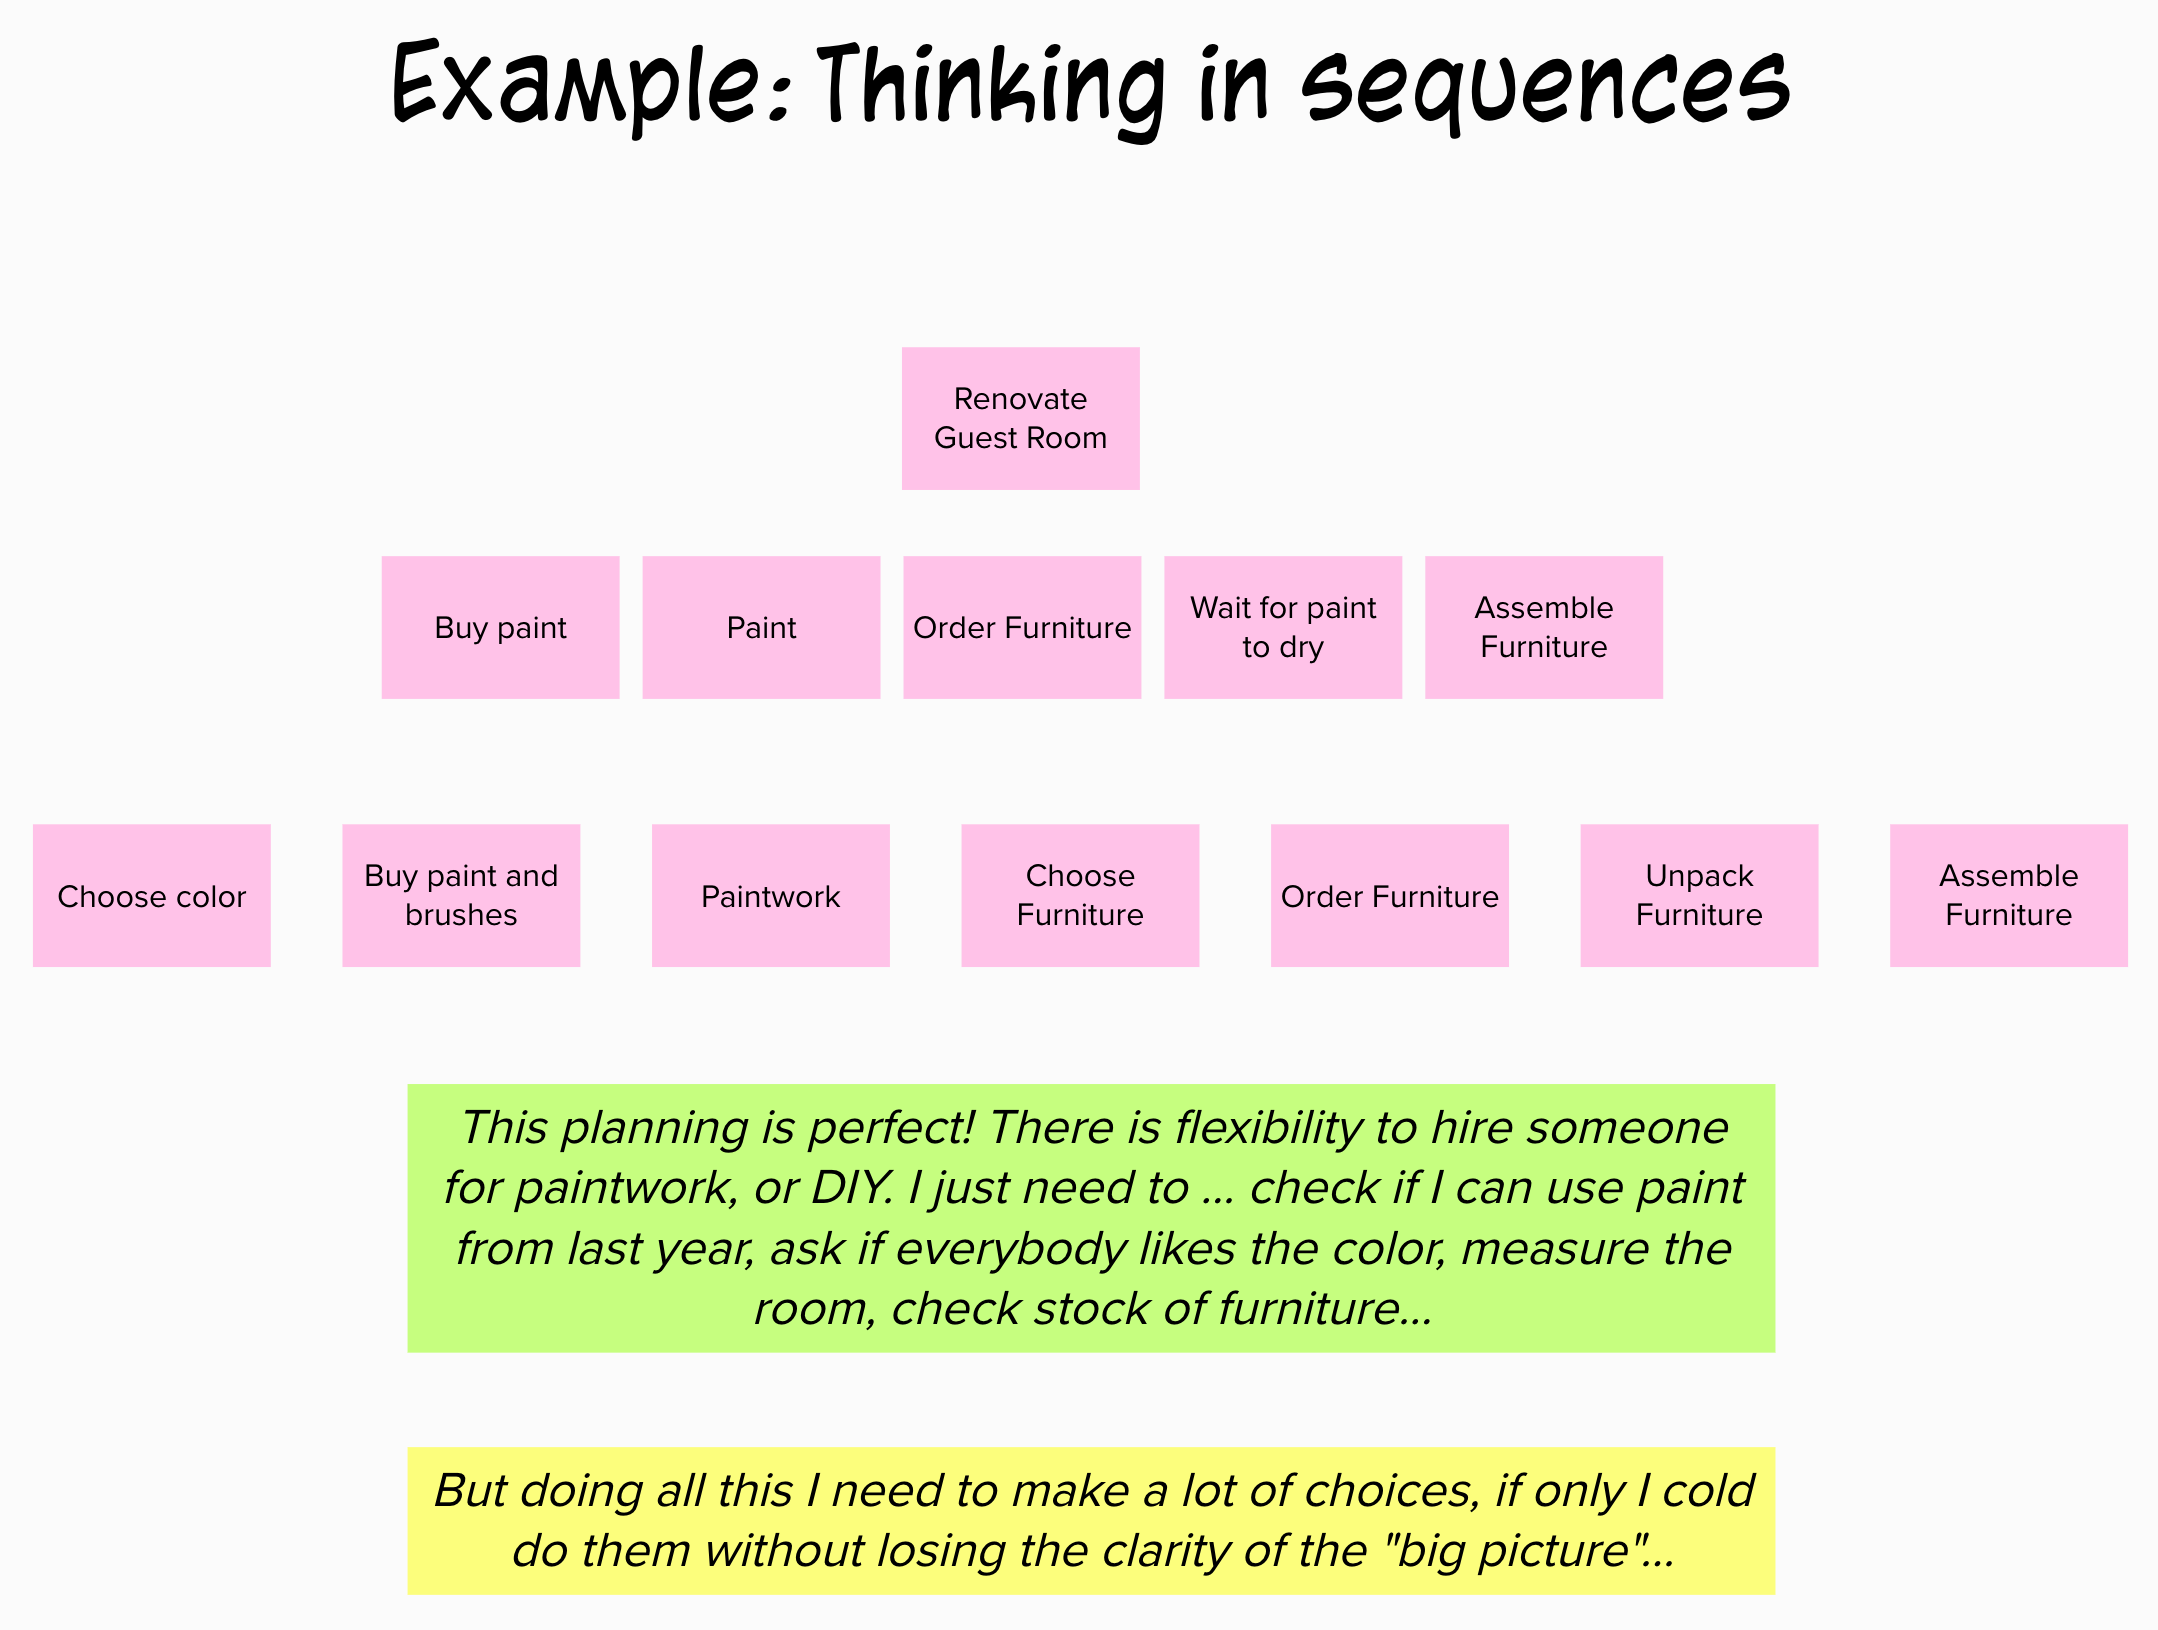 Example of thinking in sequences